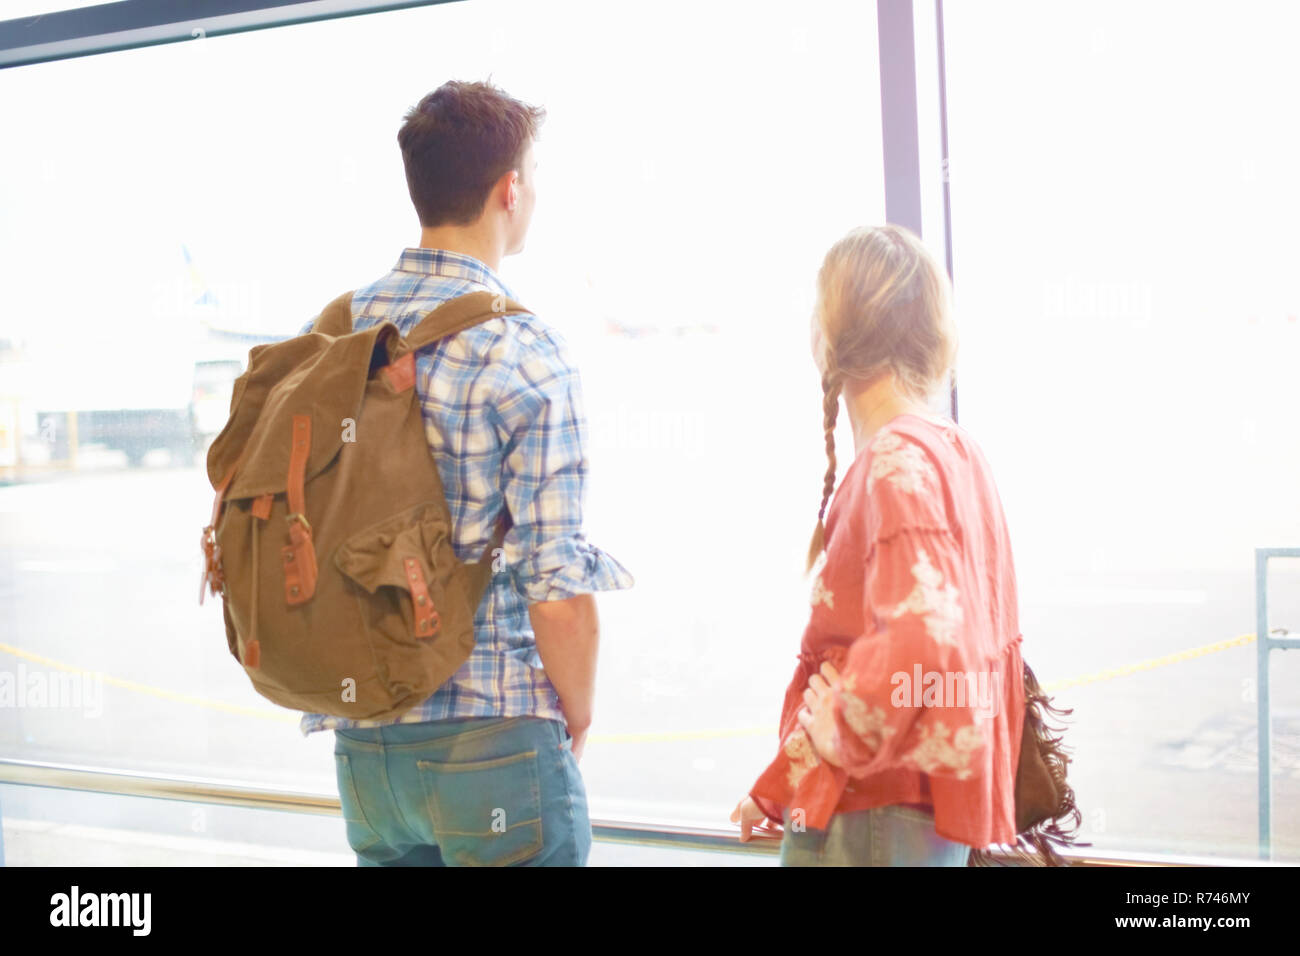 Young couple at airport, carrying backpacks, looking out of window Stock Photo